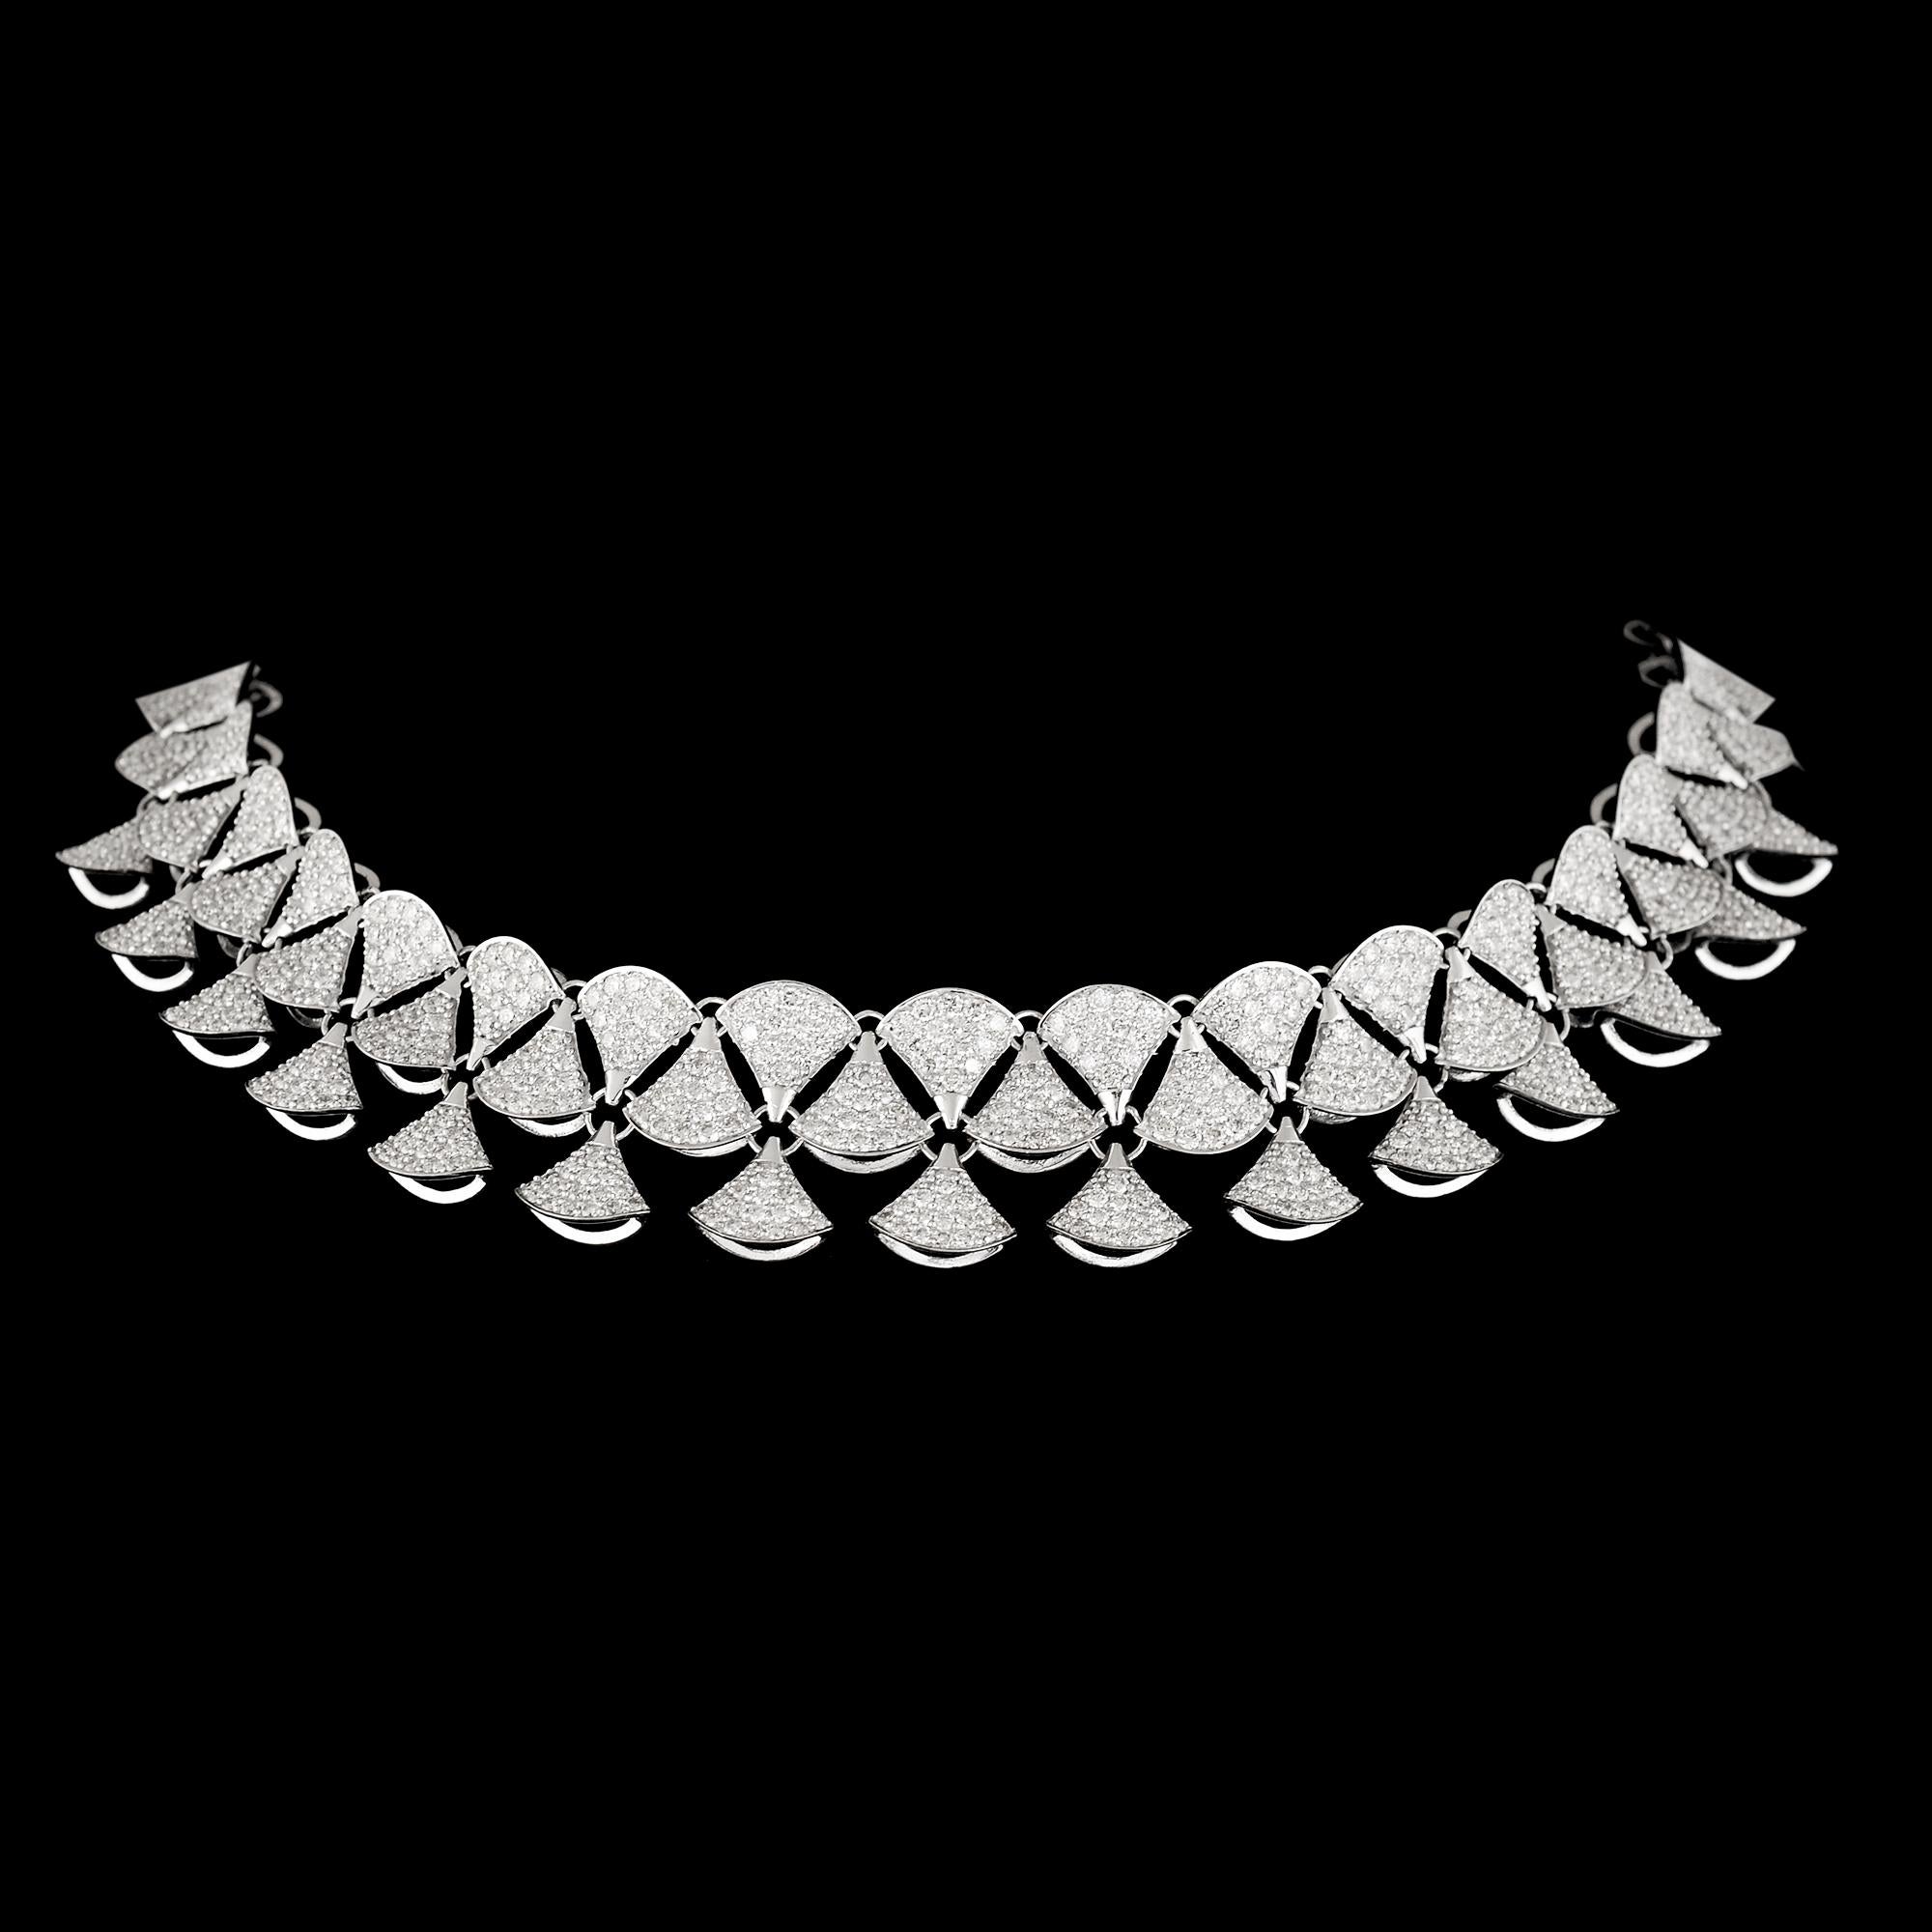 This necklace is designed to make a statement and exude timeless elegance. It delicately drapes around the neck, accentuating the neckline and adding a touch of glamour to any ensemble. Whether worn for a special occasion or as a luxurious everyday